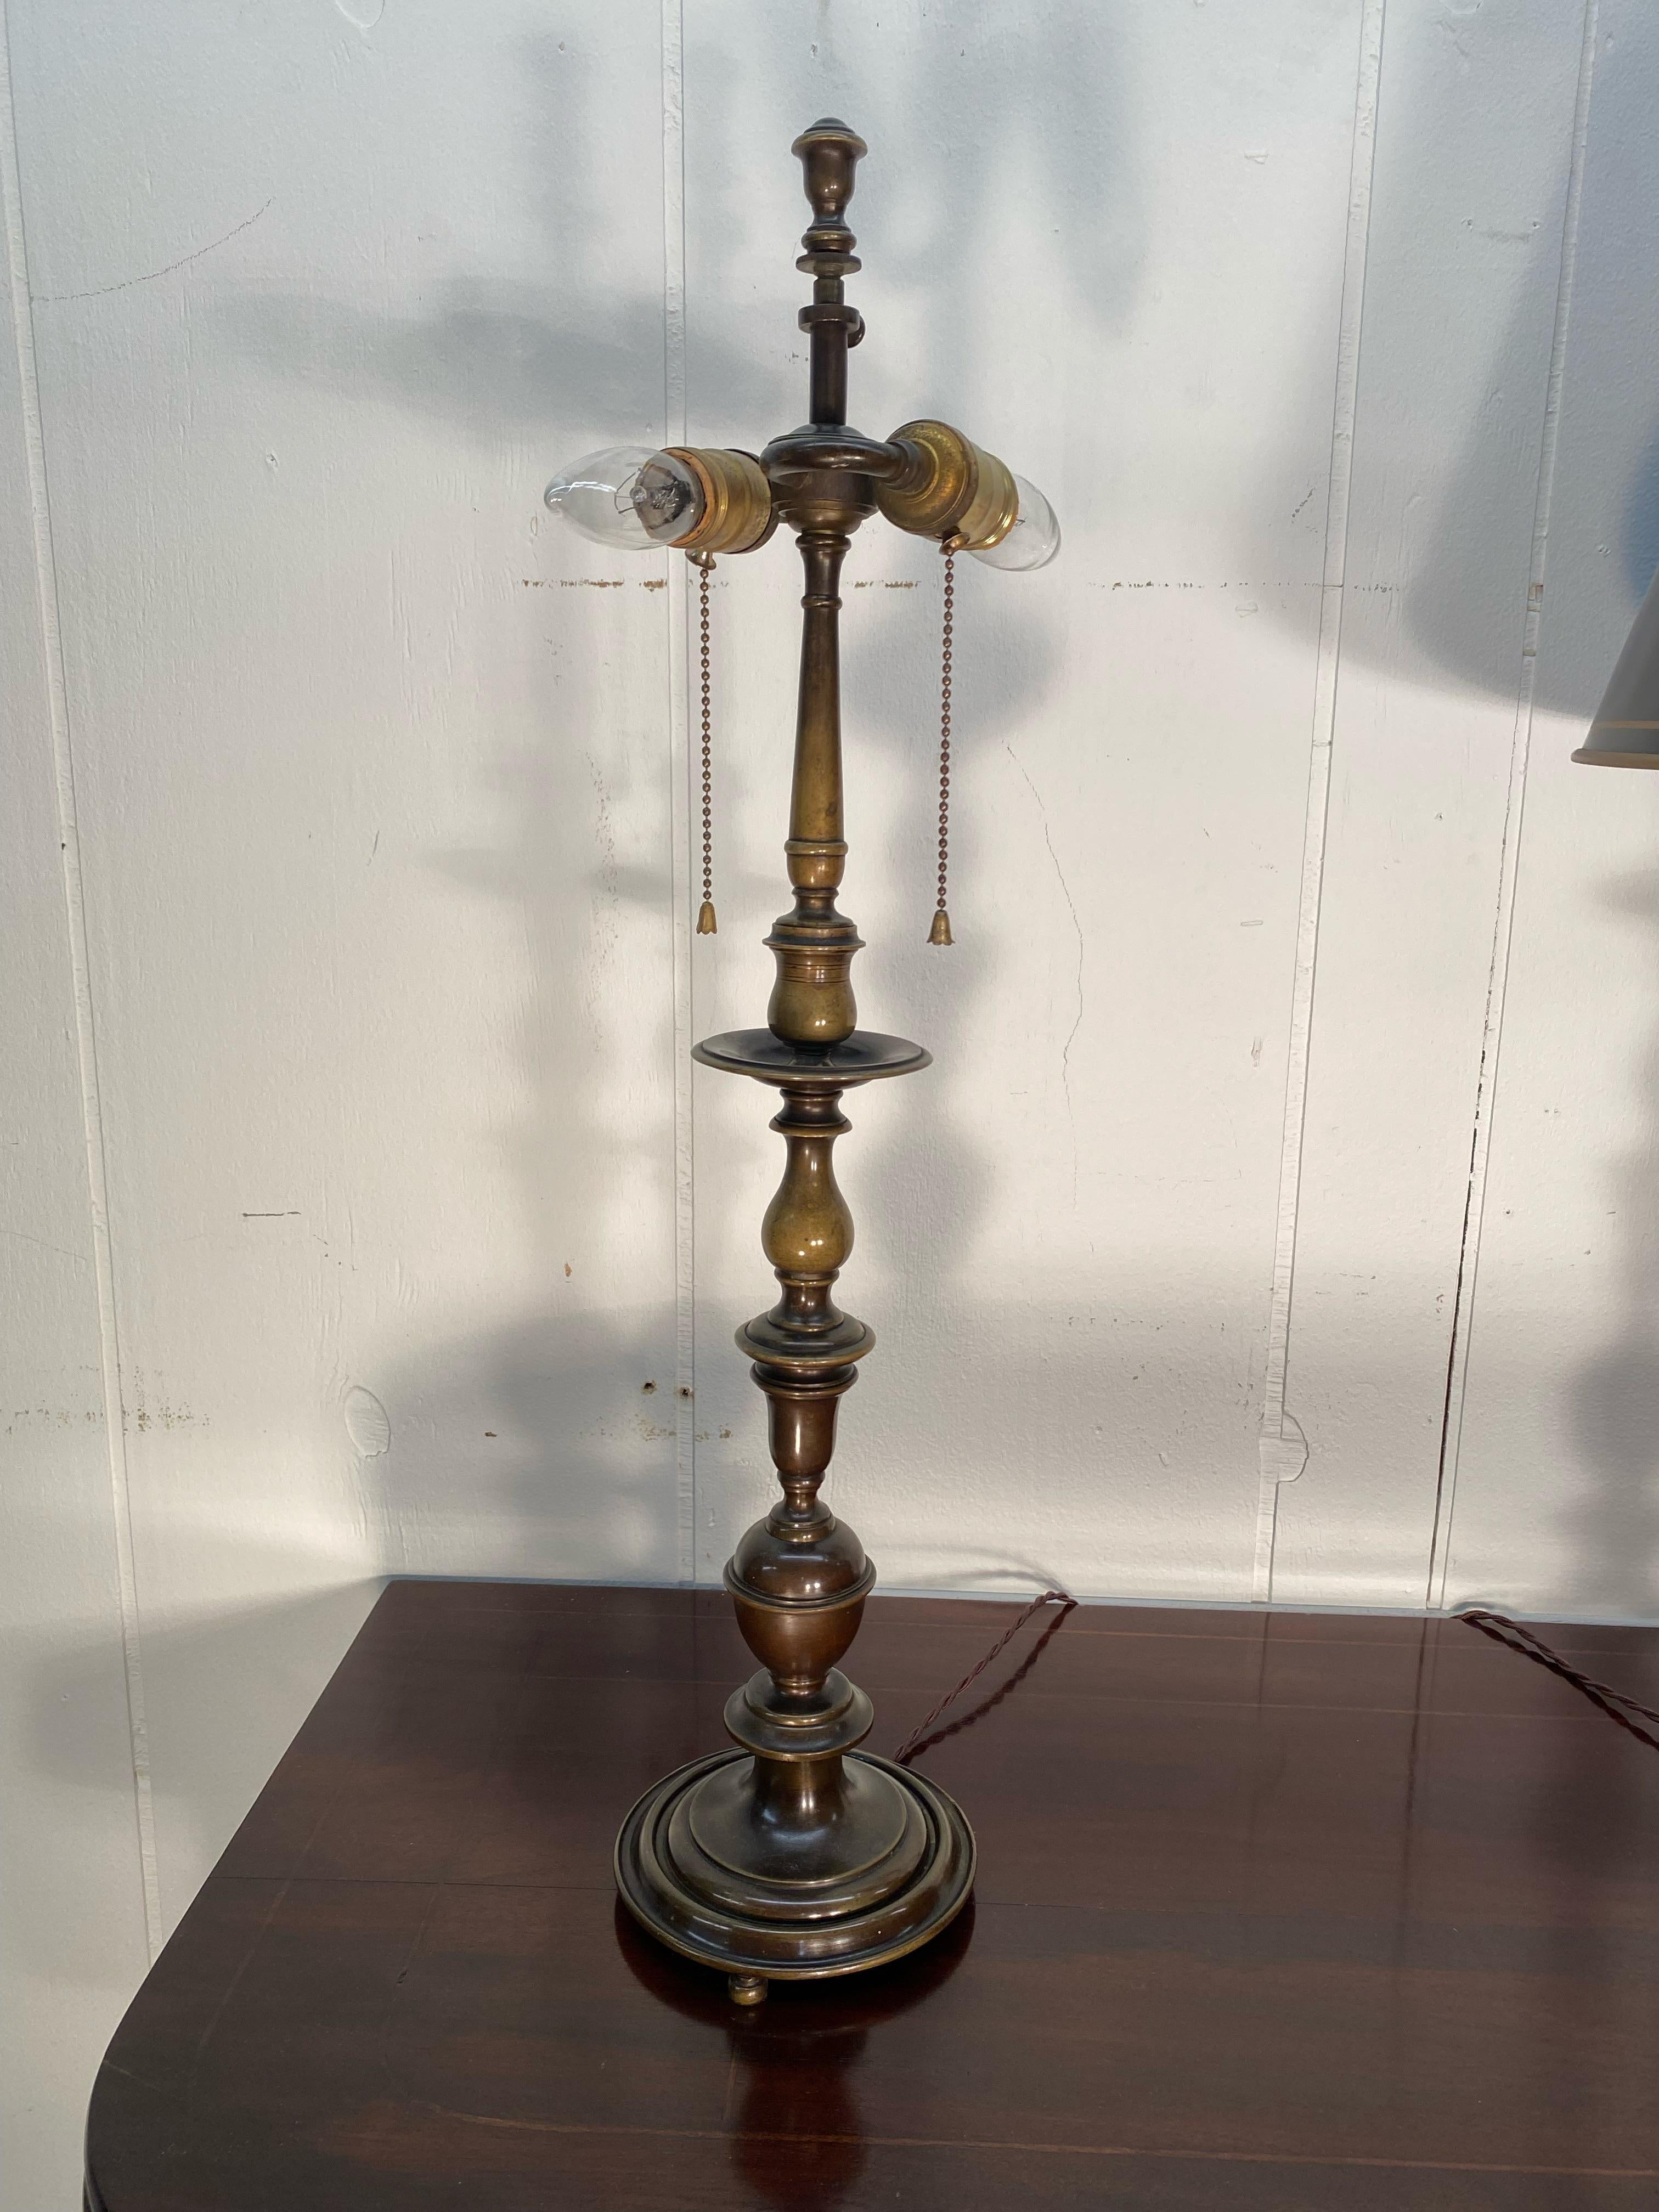 British Pair of English Bronze Balustrade Lamps with Tole Shades, Early 20th Century For Sale